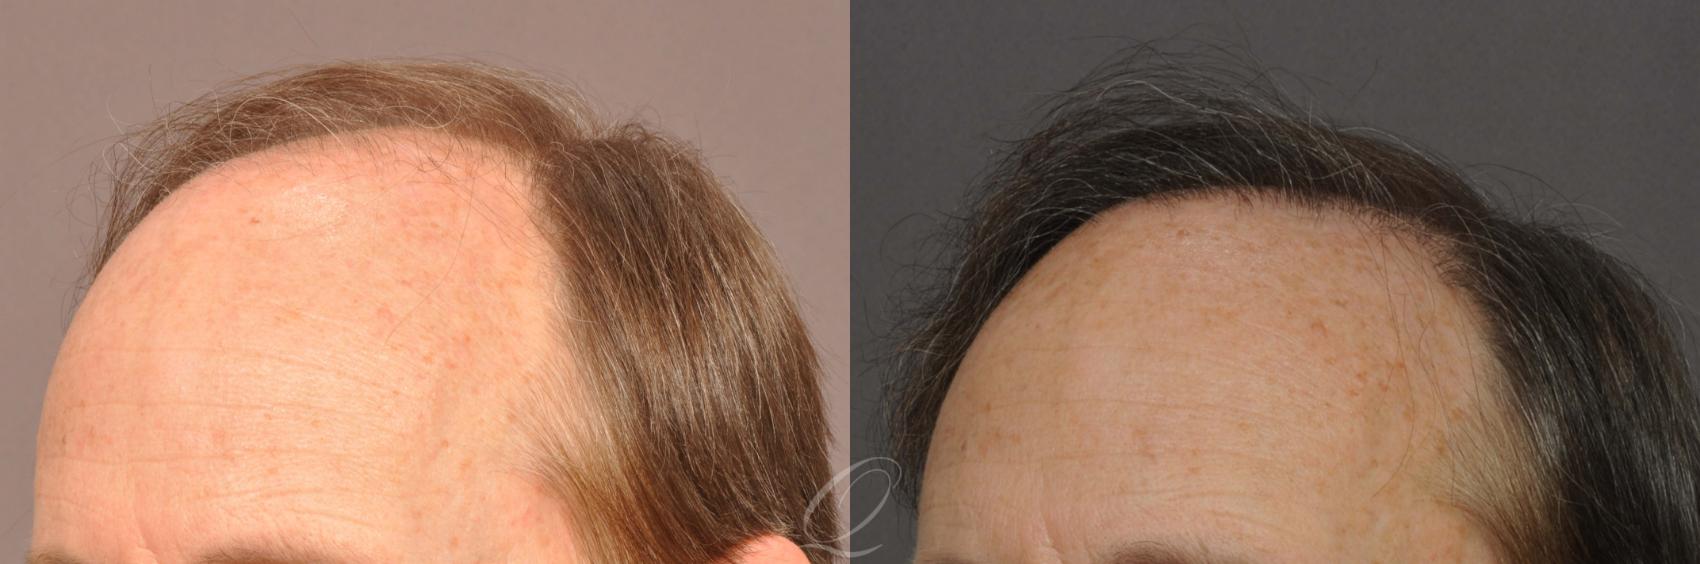 FUT Case 1021 Before & After View #5 | Rochester, Buffalo, & Syracuse, NY | Quatela Center for Hair Restoration